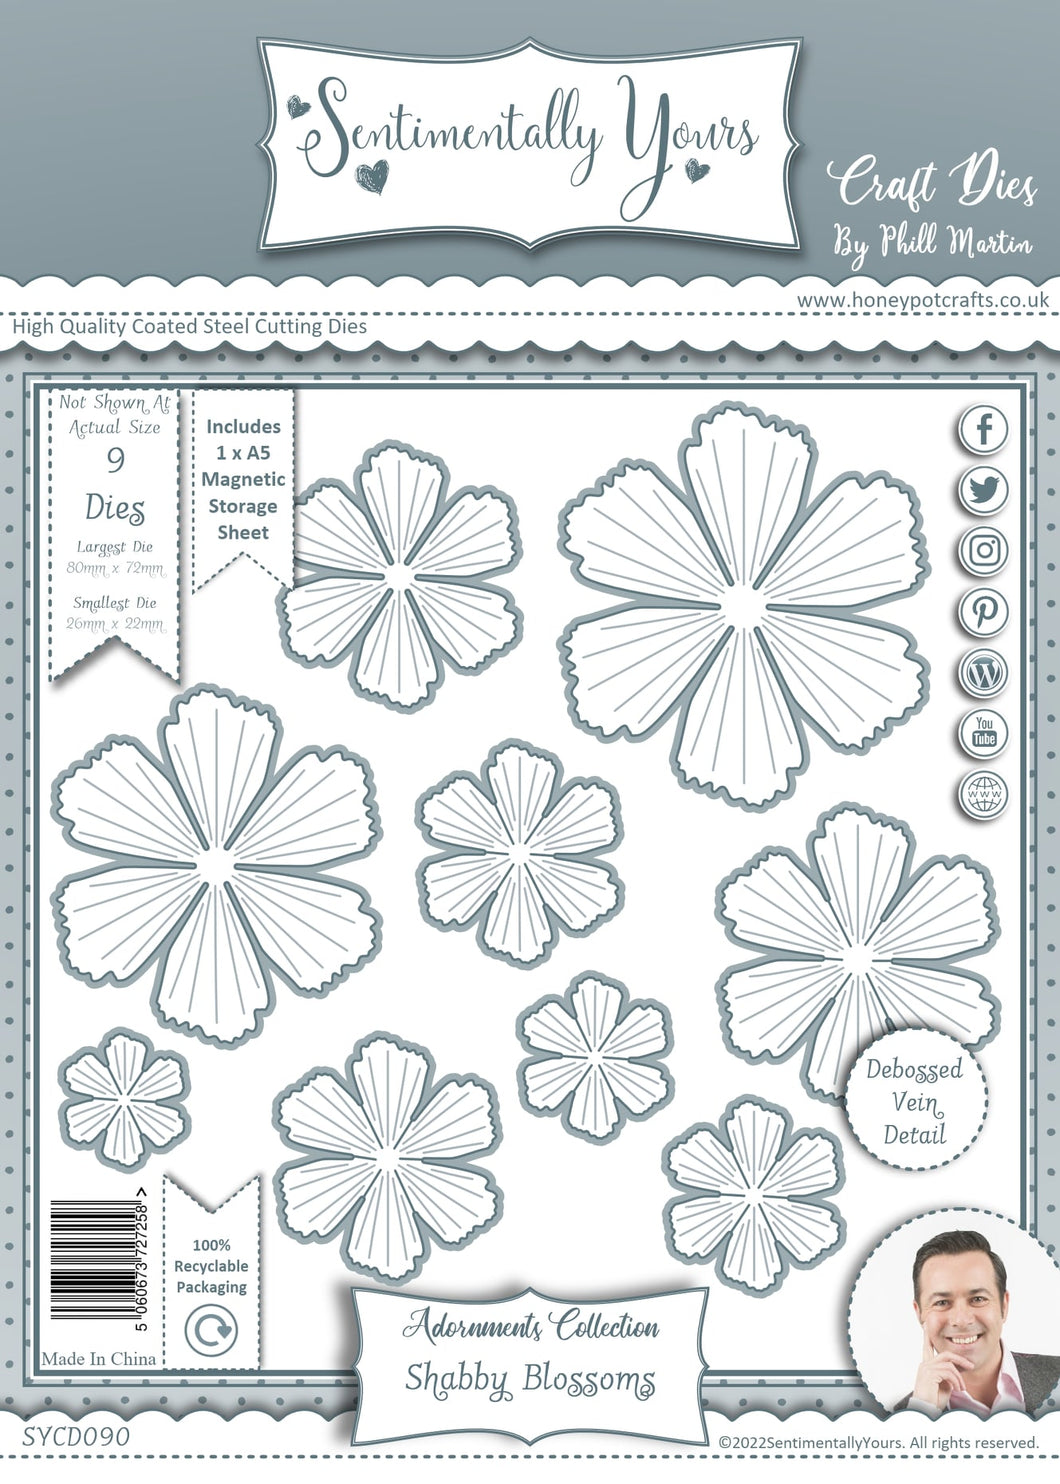 Phill Martin Sentimentally Yours Adornments Collection - Shabby Blossoms Die Set